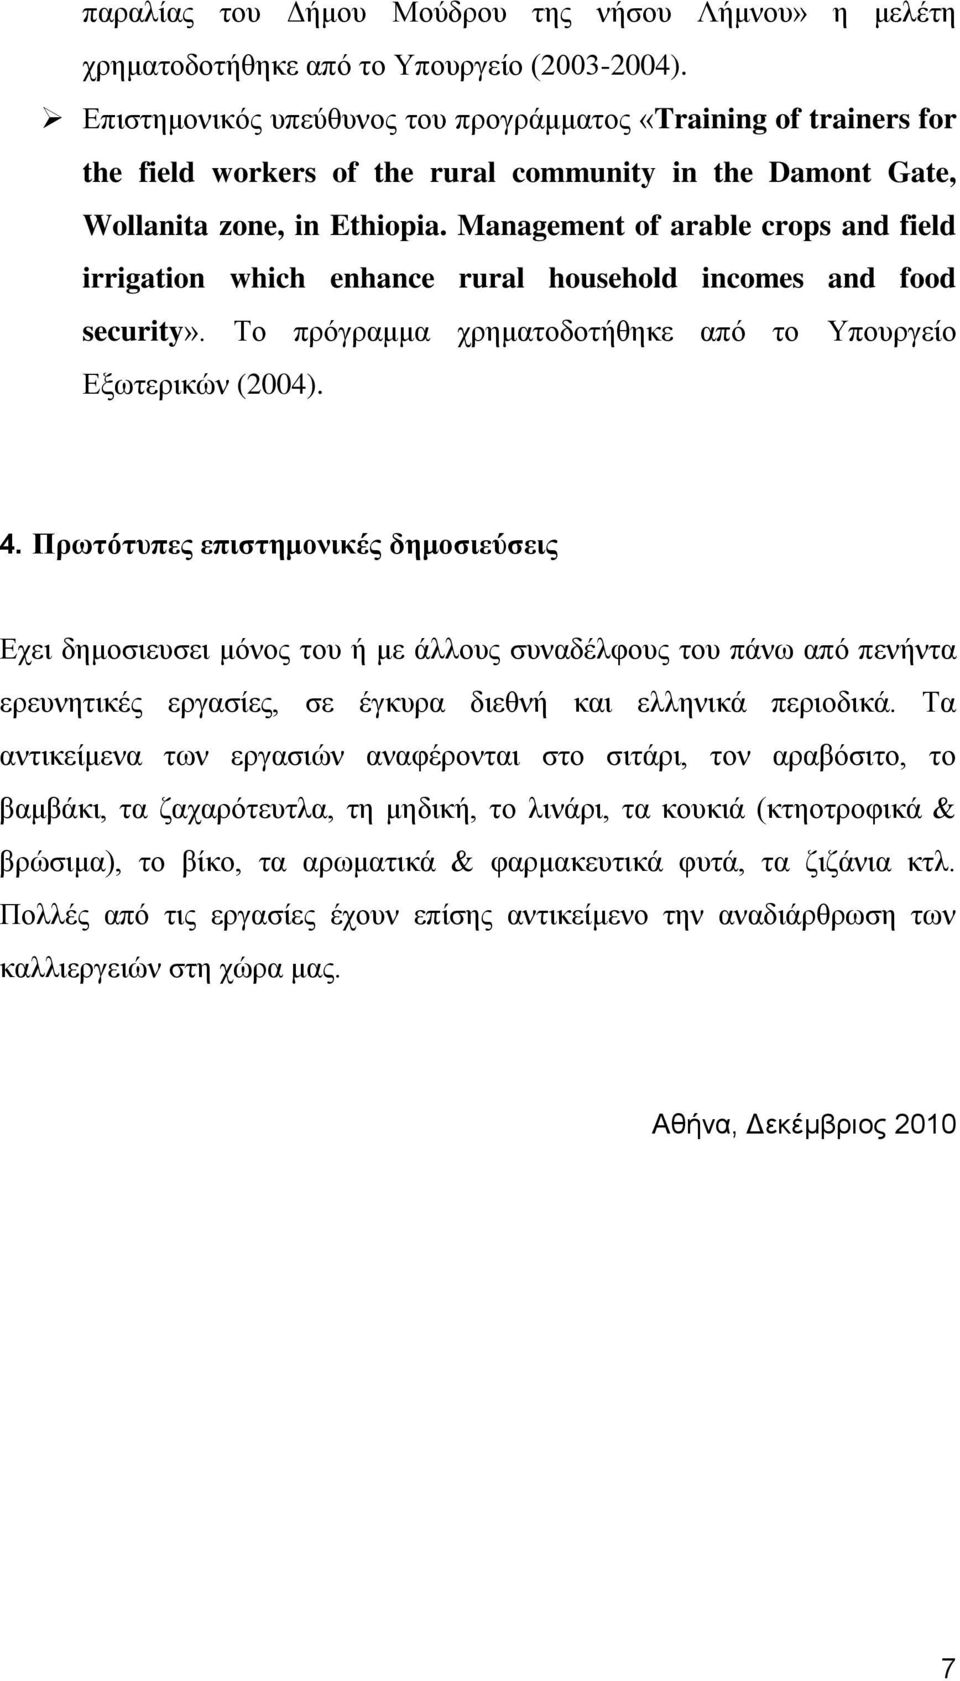 Management of arable crops and field irrigation which enhance rural household incomes and food security». Το πρόγραμμα χρηματοδοτήθηκε από το Υπουργείο Εξωτερικών (2004). 4.